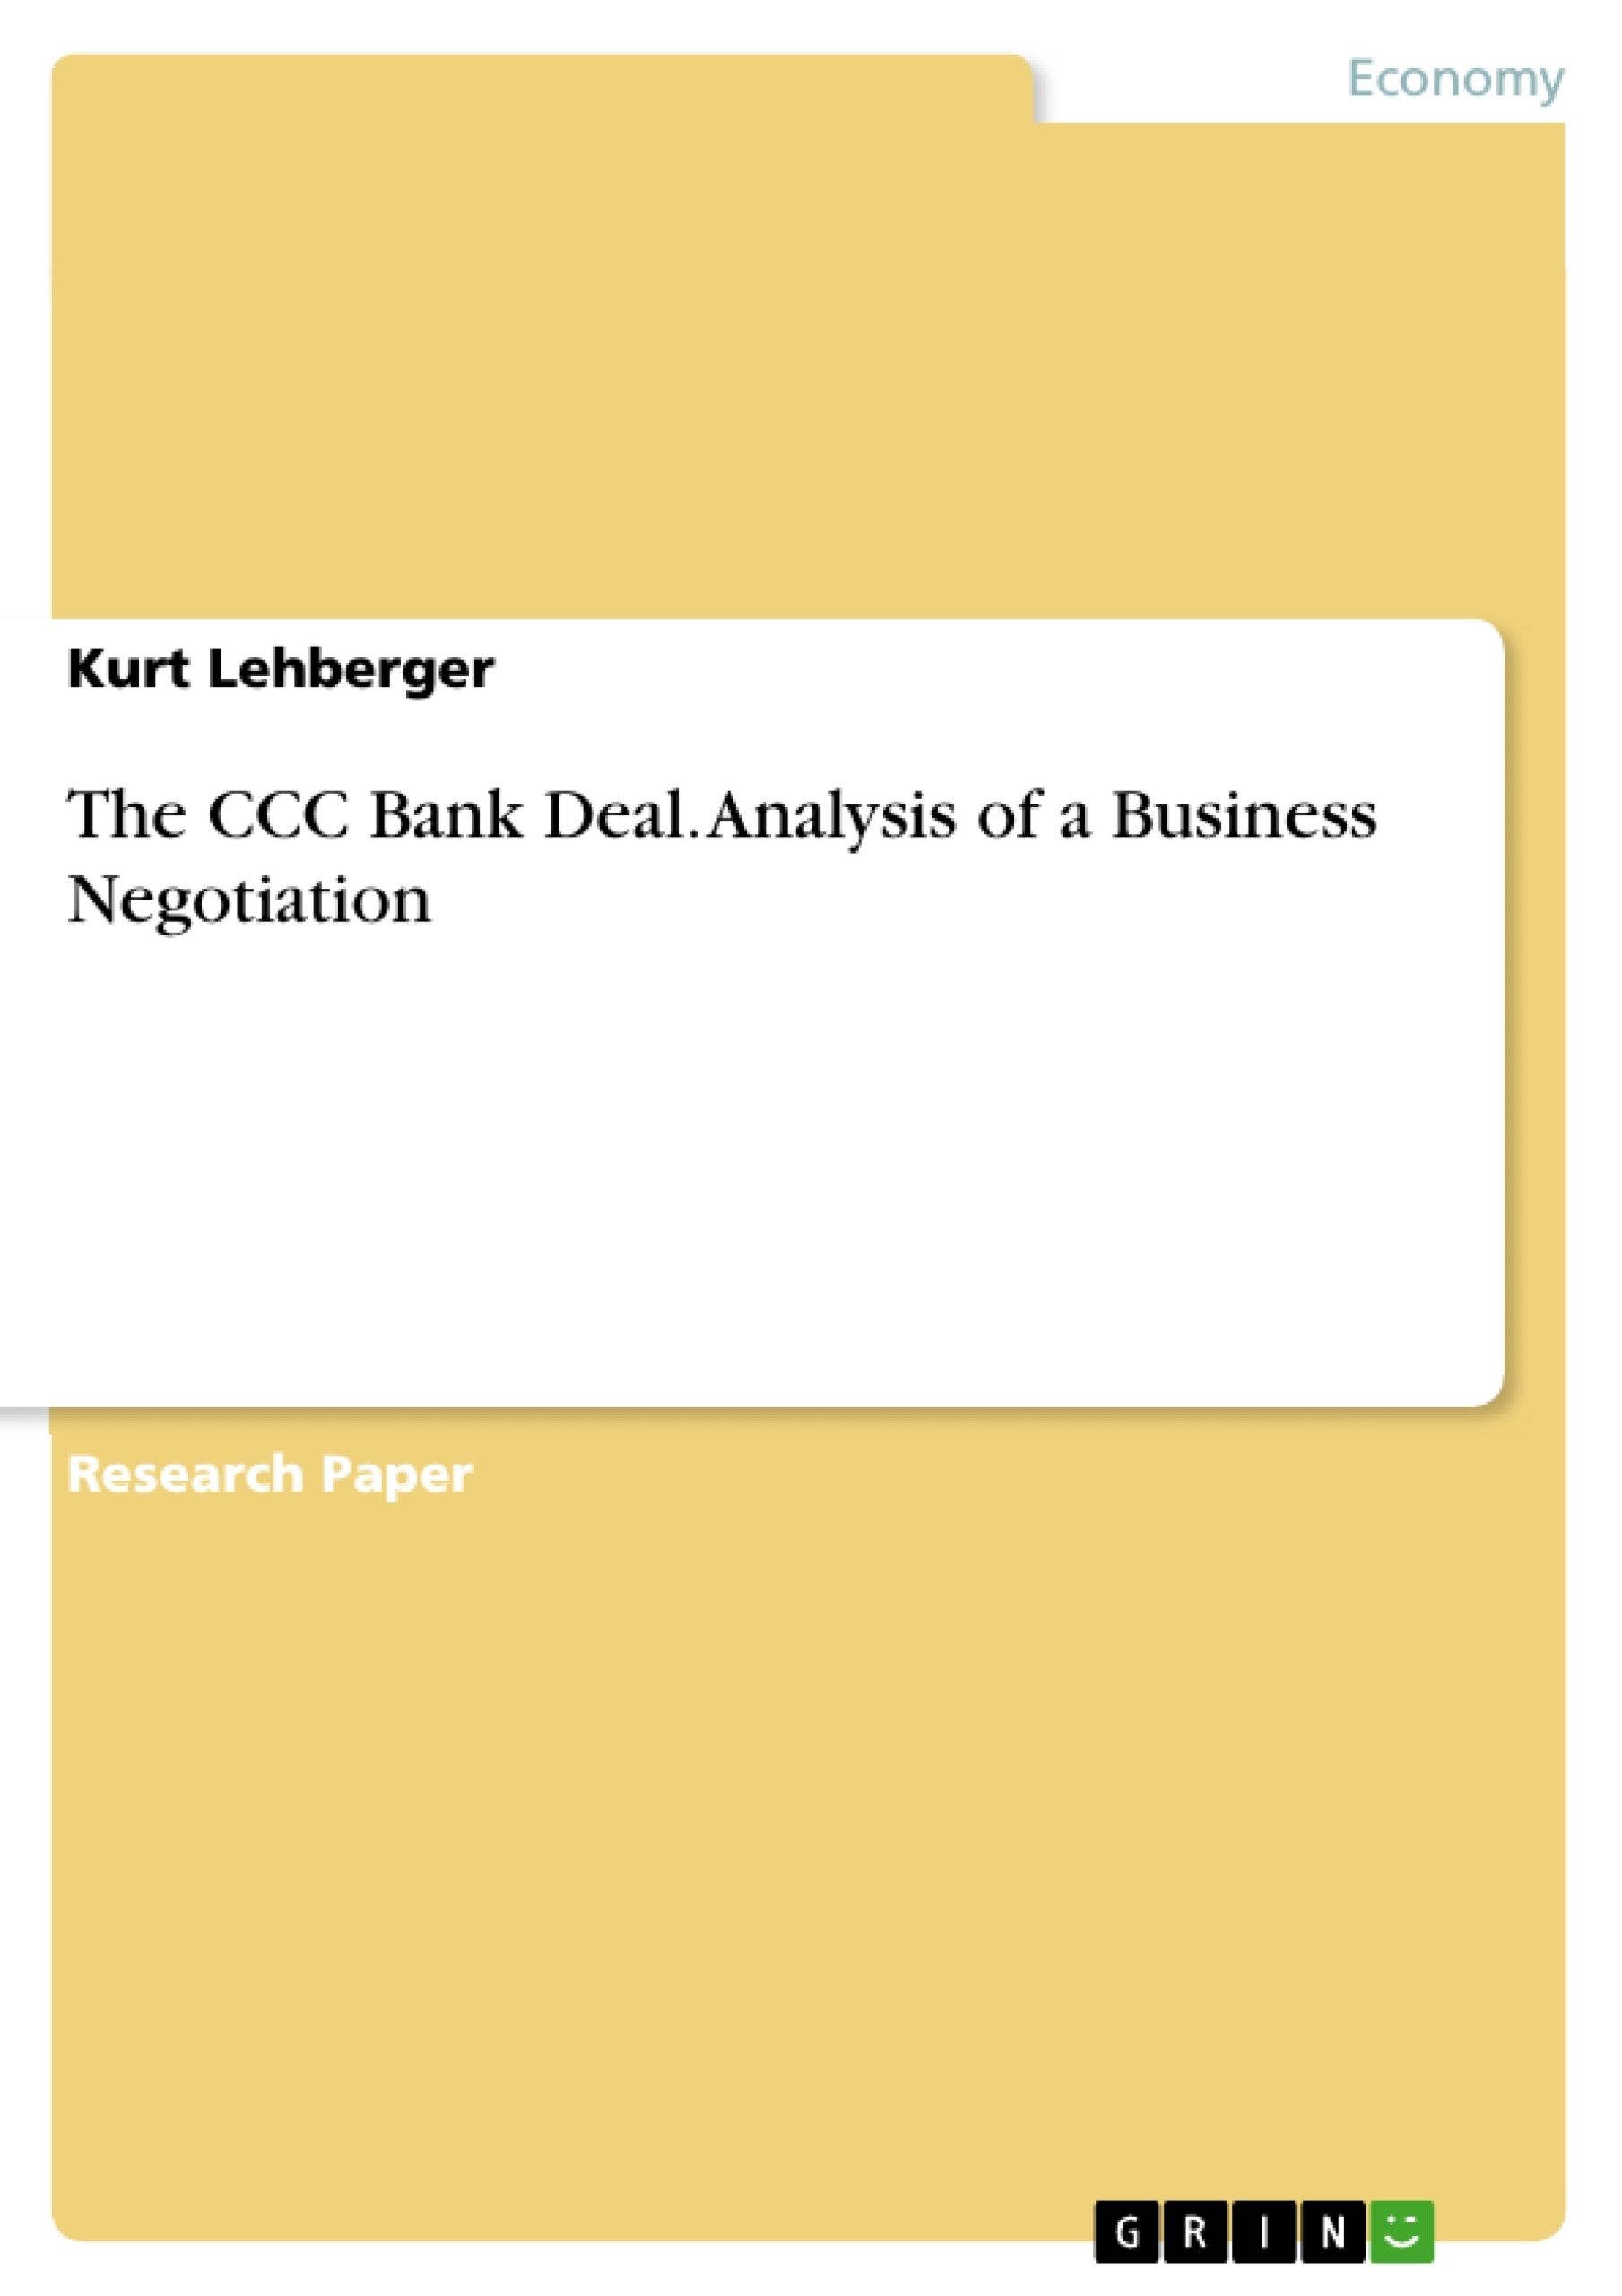 Título: The CCC Bank Deal. Analysis of a Business Negotiation